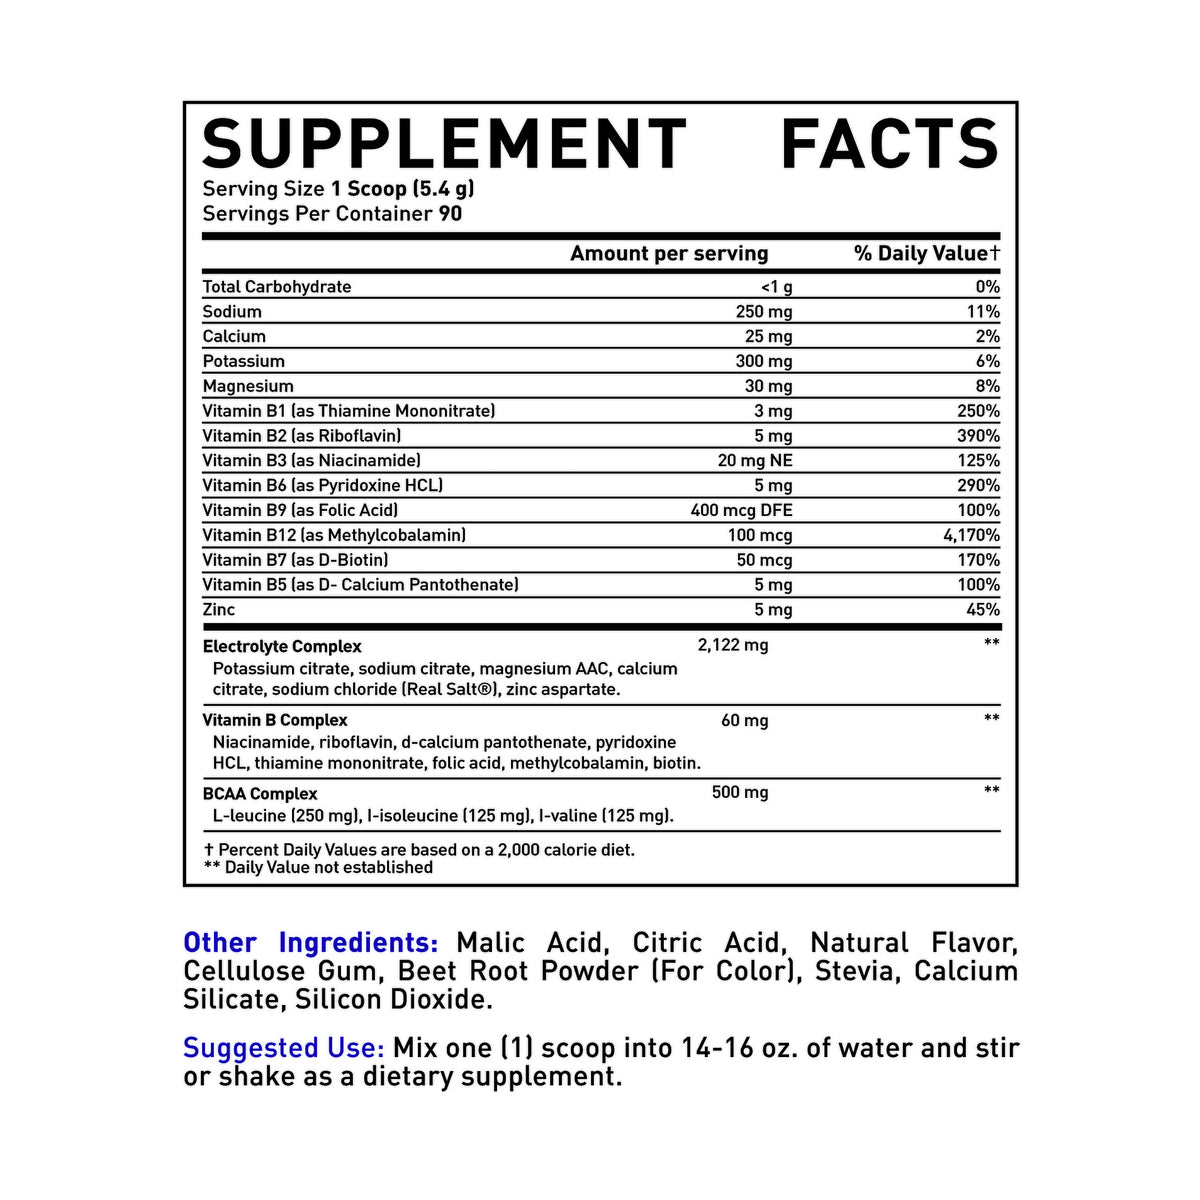 Supplement facts. Serving size: 1 scoop (5.4g). Servings per container: 90. Total carbohydrate &lt;1g 0%. Sodium 250mg 11%. Calcium 25mg 2%. Potassium 300mg 6%. Magnesium 30mg 8%. Vitamin B1 (as thiamine mononitrate) 3mg 250%.